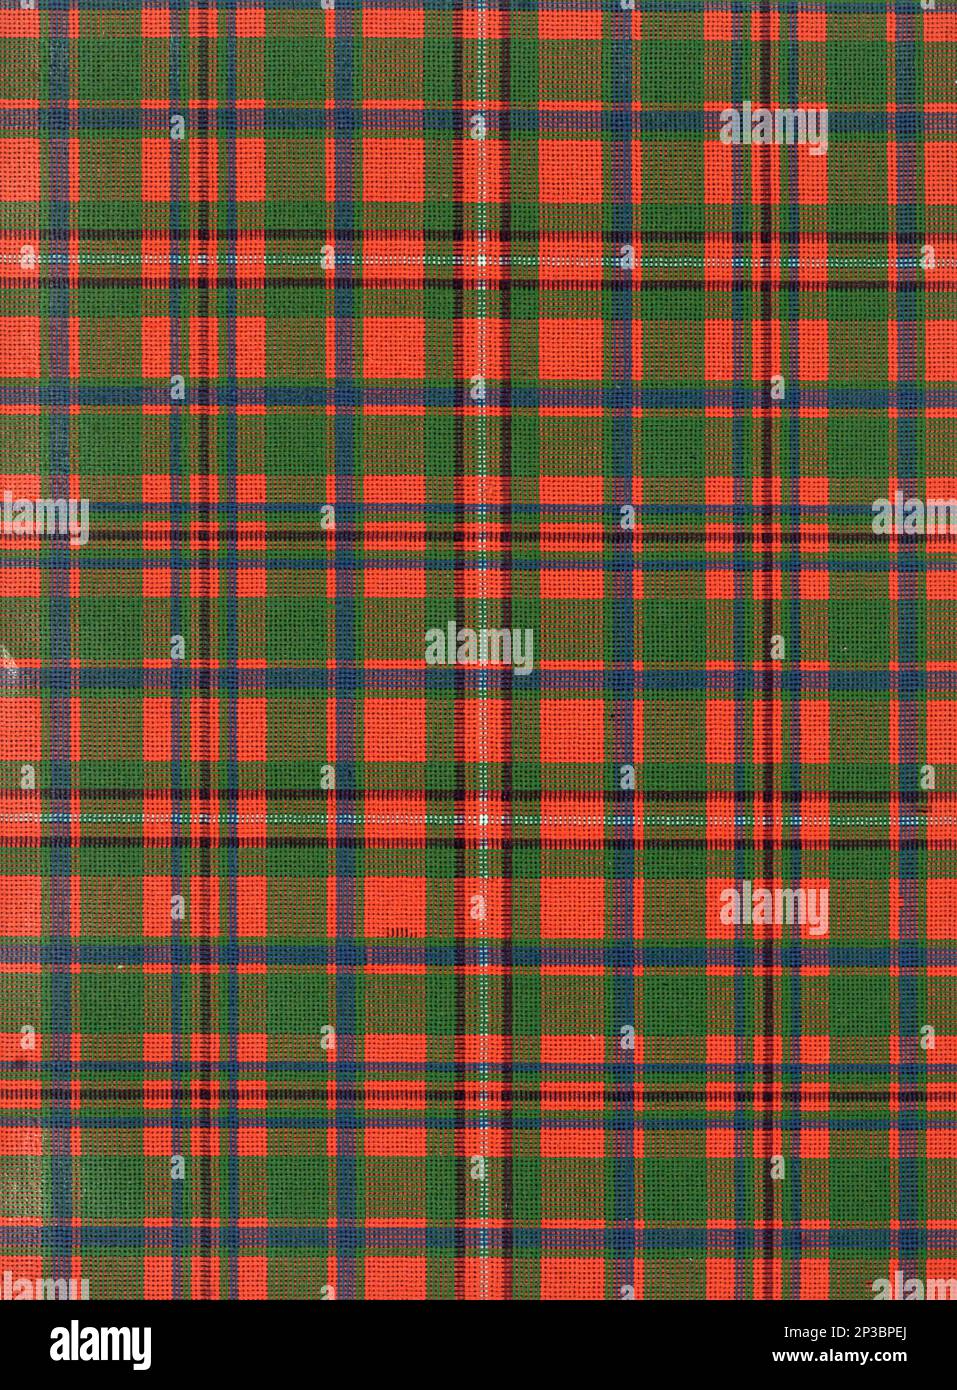 Mackinnon Clan Tartan in red and green from the book ' A history of the Scottish Highlands, Highland clans and Highland regiments ' Volume 1 by Maclauchlan, Thomas, 1816-1886; Wilson, John, 1785-1854; Keltie, John Scott, Sir, 1840-1927 Publication date 1875 publisher Edinburgh ; London : A. Fullarton Stock Photo